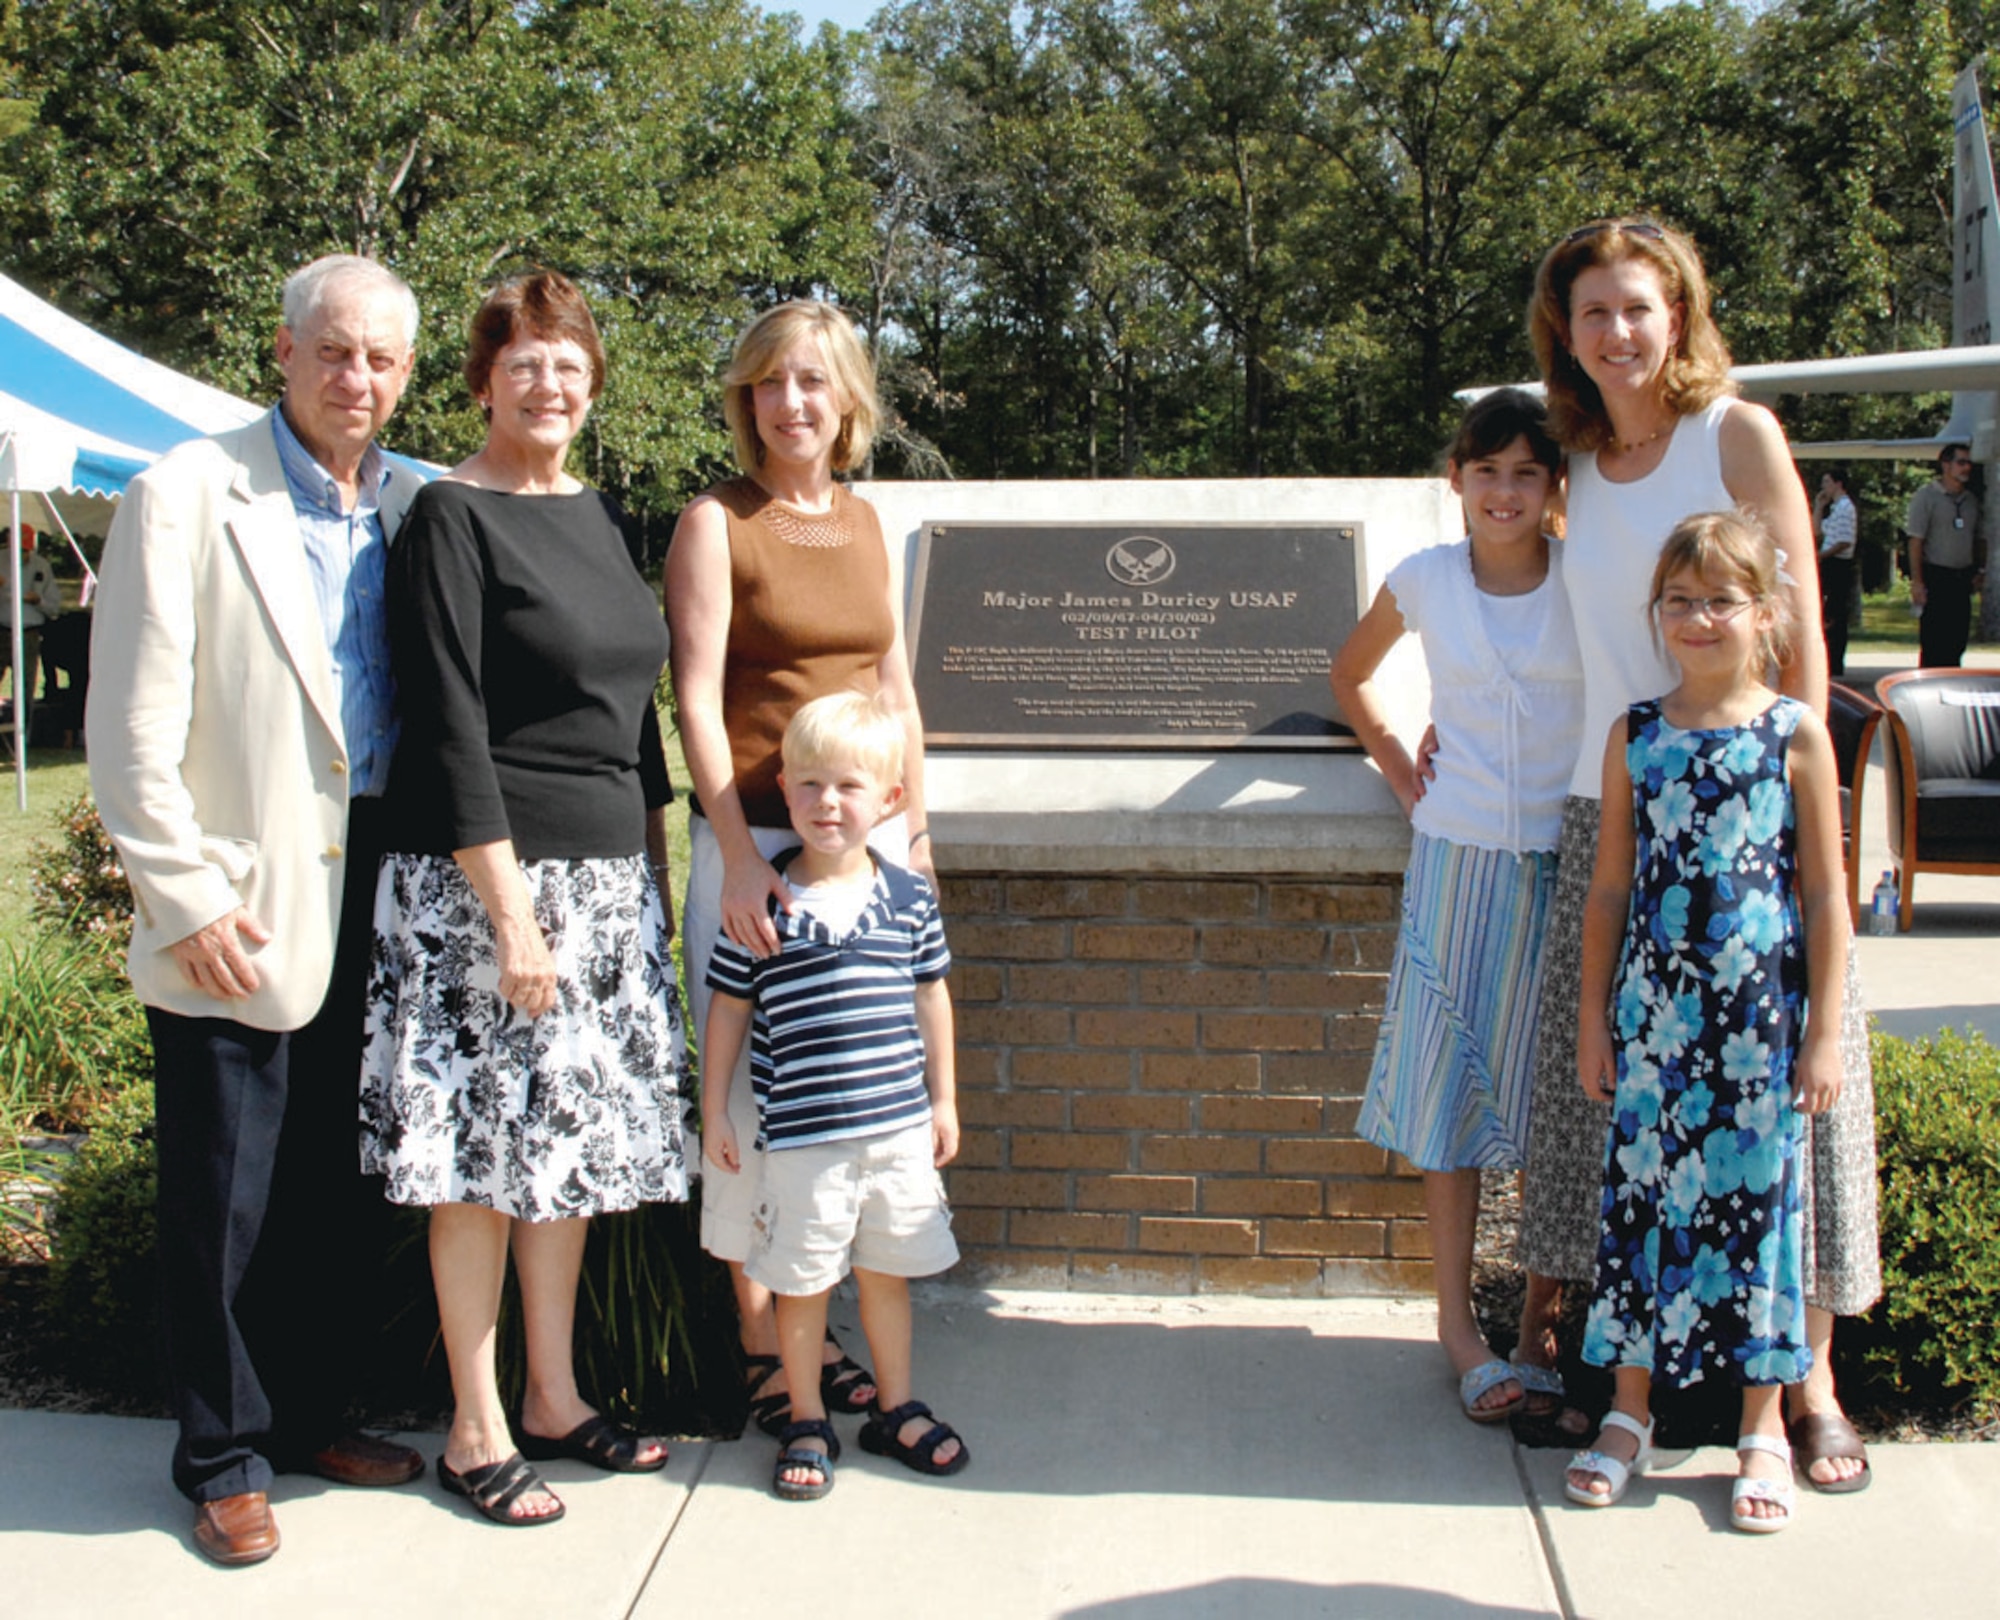 Maj. Jim Duricy’s parents Art and Irene Duricy, sister Christine Benigar and her son; widow Elaine Johnson and daughters Erin and Kate stand in front of the plaque honoring Maj. Duricy following the August 2007 ceremony to dedicate the F-15 Eagle static display at Arnold Air Force Base, Tenn., in memory of Maj. Duricy. Maj. Duricy died April 30, 2002, when he was forced to eject at a high speed as the F-15C he piloted crashed into the Gulf of Mexico. His body was never found. A 12-year test pilot, Maj. Duricy was assigned to the 40th Flight Test Squadron based at Eglin Air Force Base, Fla., at the time of his death. He was on a captive flight development test of a new missile when the aircraft crashed. (U.S. Air Force photo by David Housch)